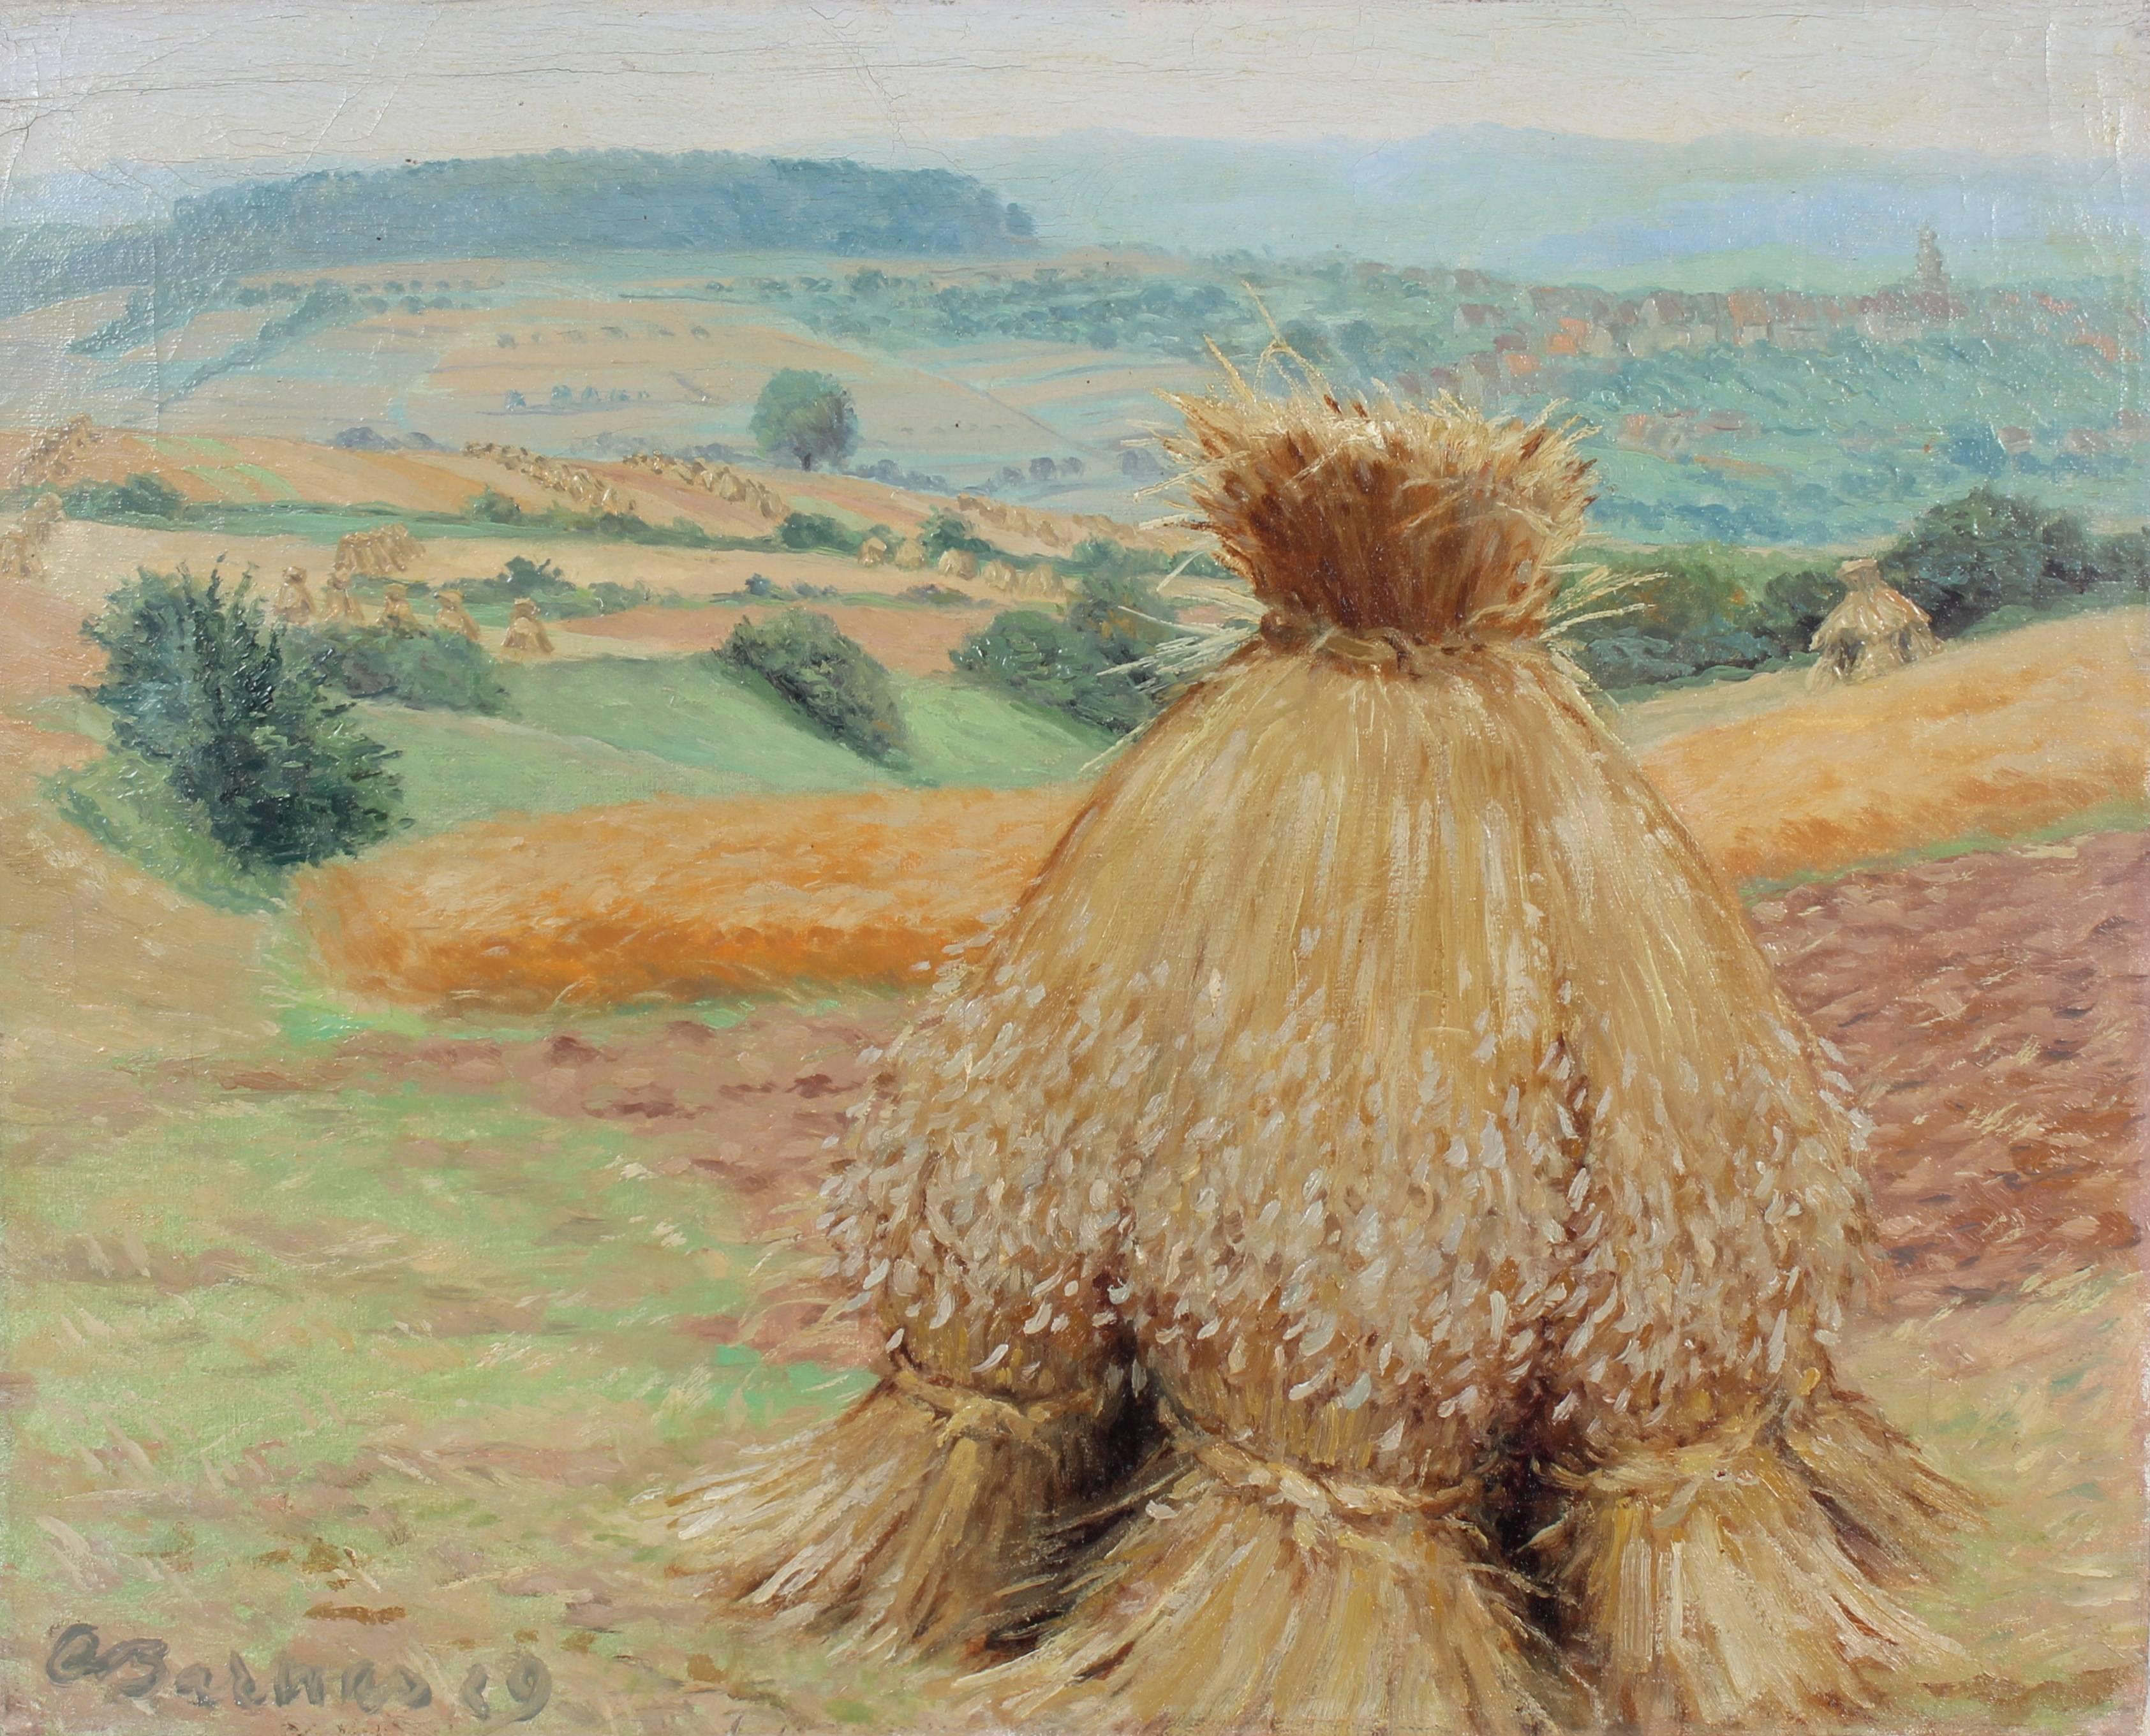 Carl Barnas Landscape Painting - "View of Ruppertsburg with Haystacks", German Landscape in Oil, 1929